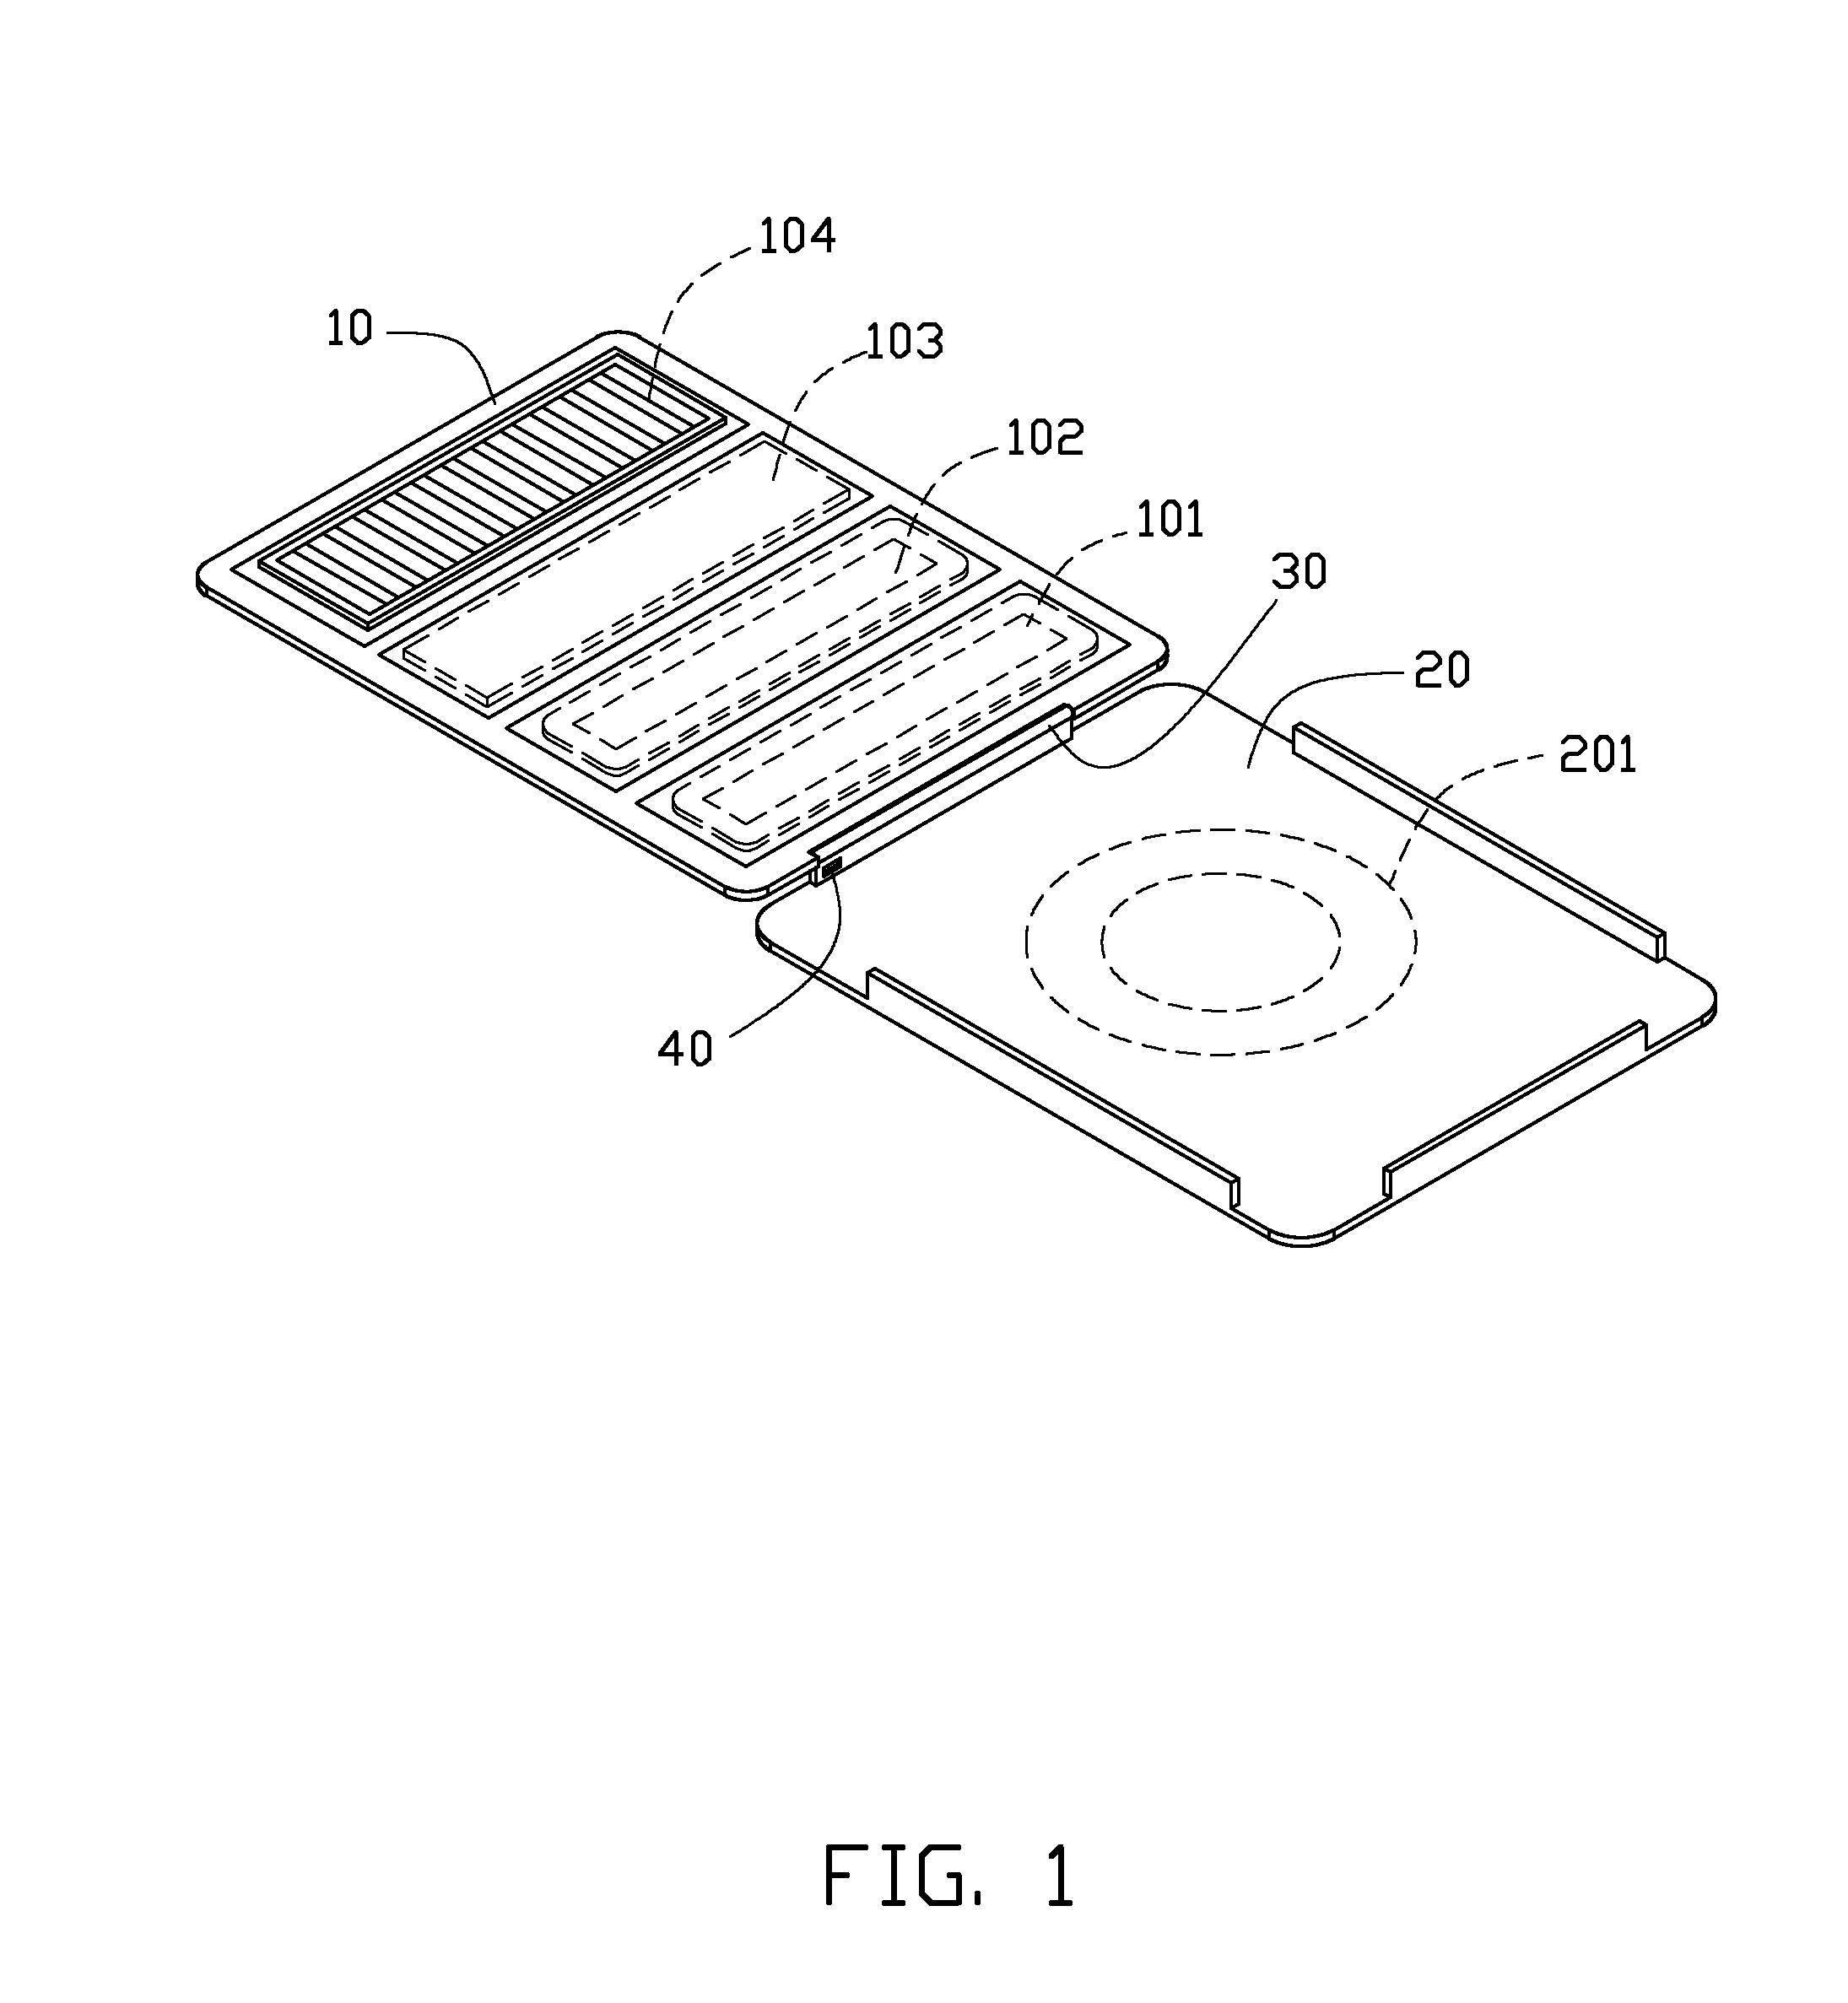 Cover for electronic device